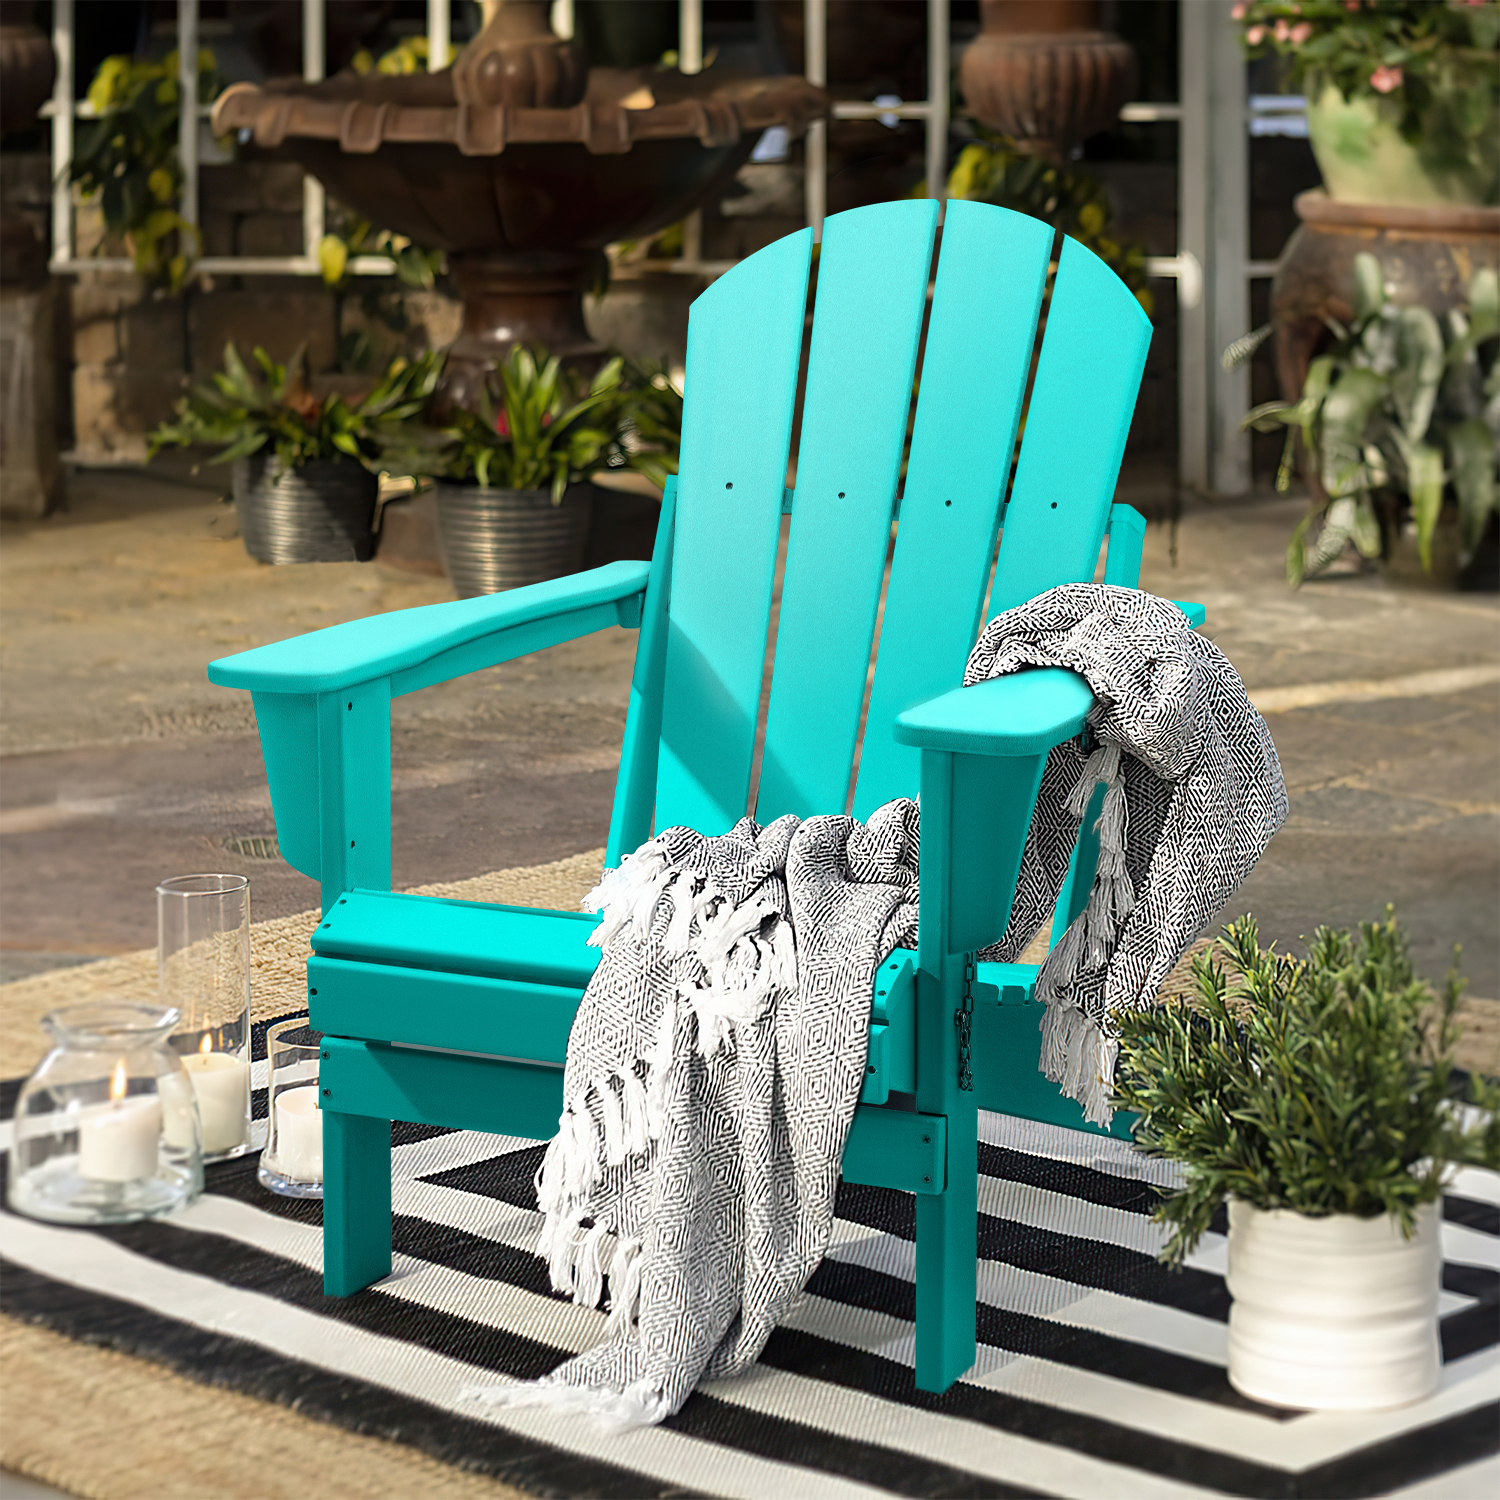 Devoko Folding Adirondack Chair HDPE Outdoor Lounge Chair Weather Resistant & Portable (One Chair Only), Turquoise - image 3 of 7